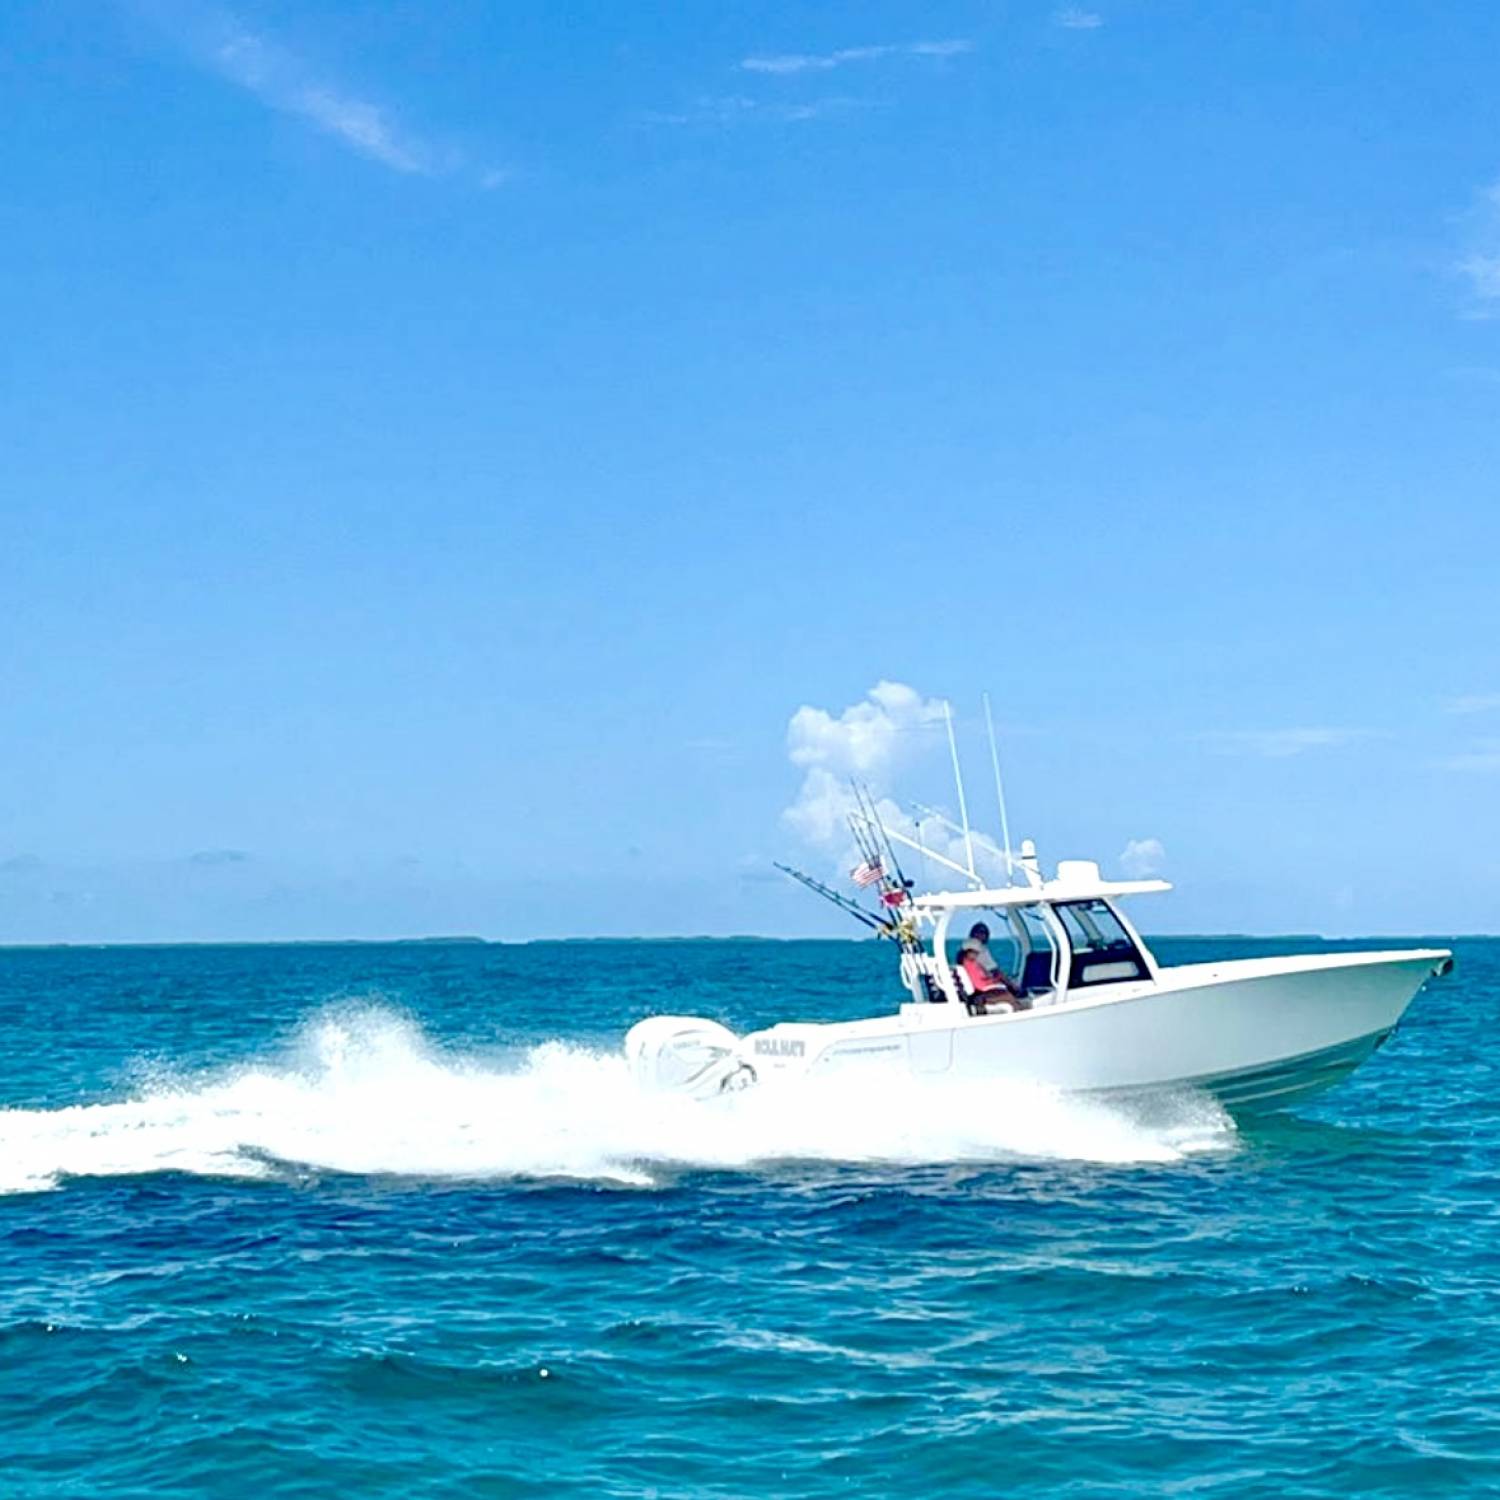 Title: Cruising south to Cambridge park Bahamas - On board their Sportsman Open 322 Center Console - Location: Exumas Bahamas. Participating in the Photo Contest #SportsmanJuly2023